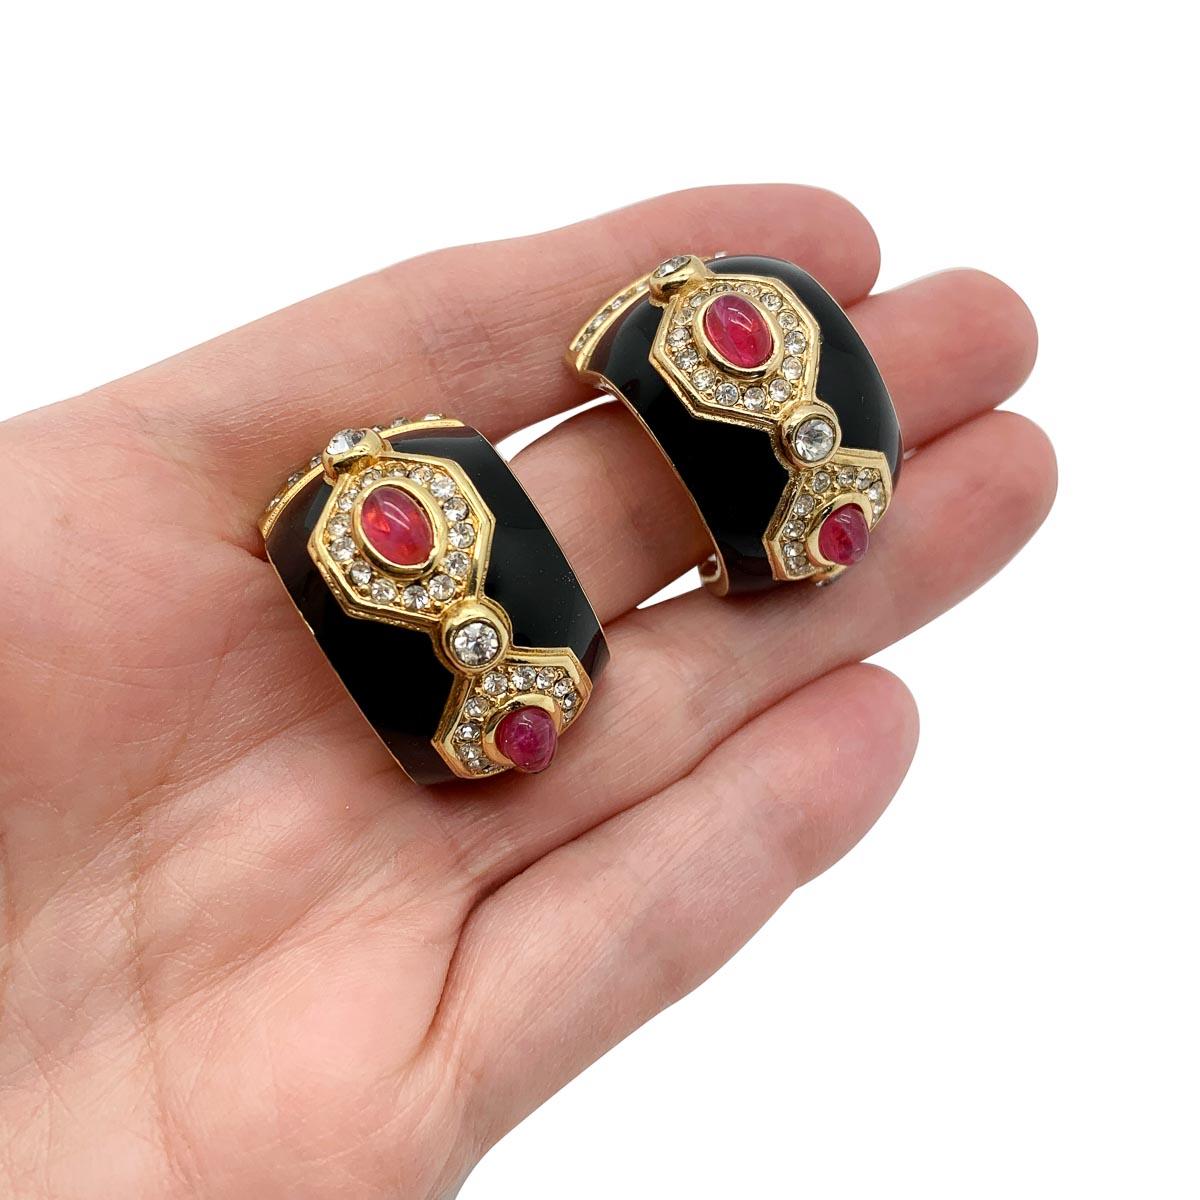 A fabulously luxurious pair of vintage Dior ruby cabochon earrings. Featuring a huggie design with lustrous black enamel finished with stones. The stones, cabochon ruby glass and white chatons, arranged in an art deco style emulating fine jewels to